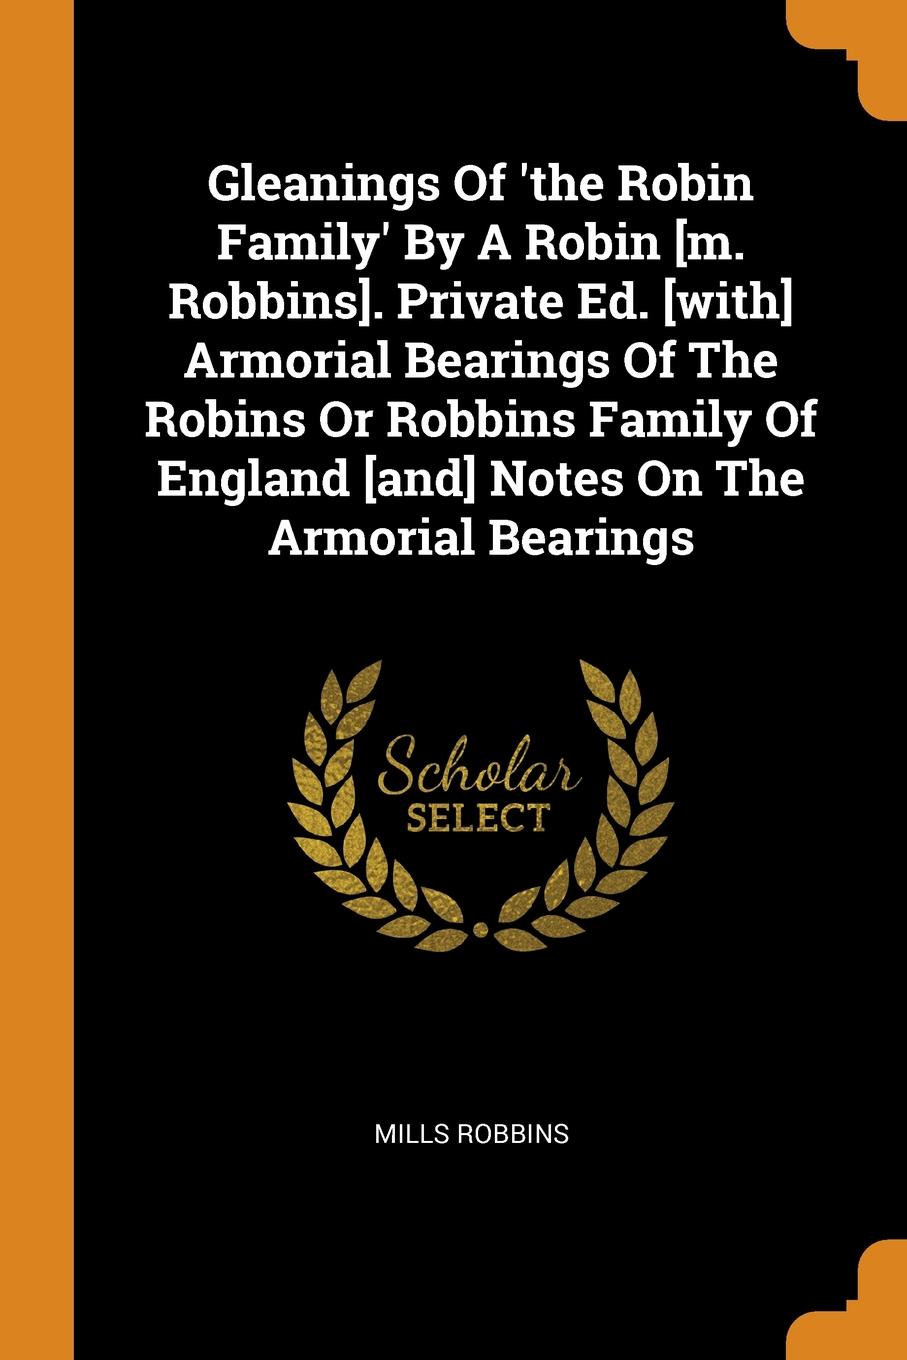 Gleanings Of .the Robin Family. By A Robin .m. Robbins.. Private Ed. .with. Armorial Bearings Of The Robins Or Robbins Family Of England .and. Notes On The Armorial Bearings